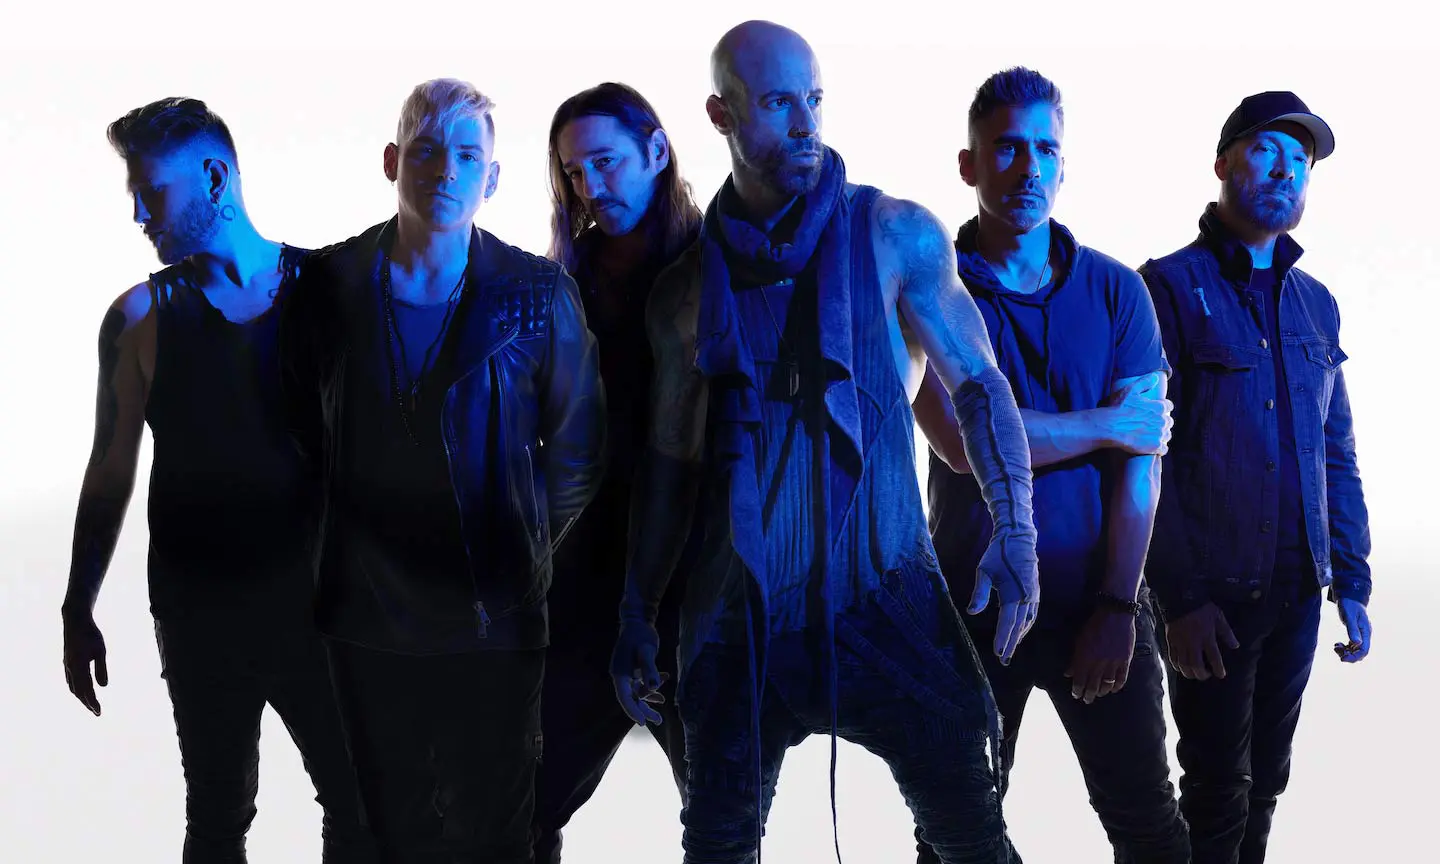 "Daughtry's Emotional Return: 'Artificial' Single Out Now"